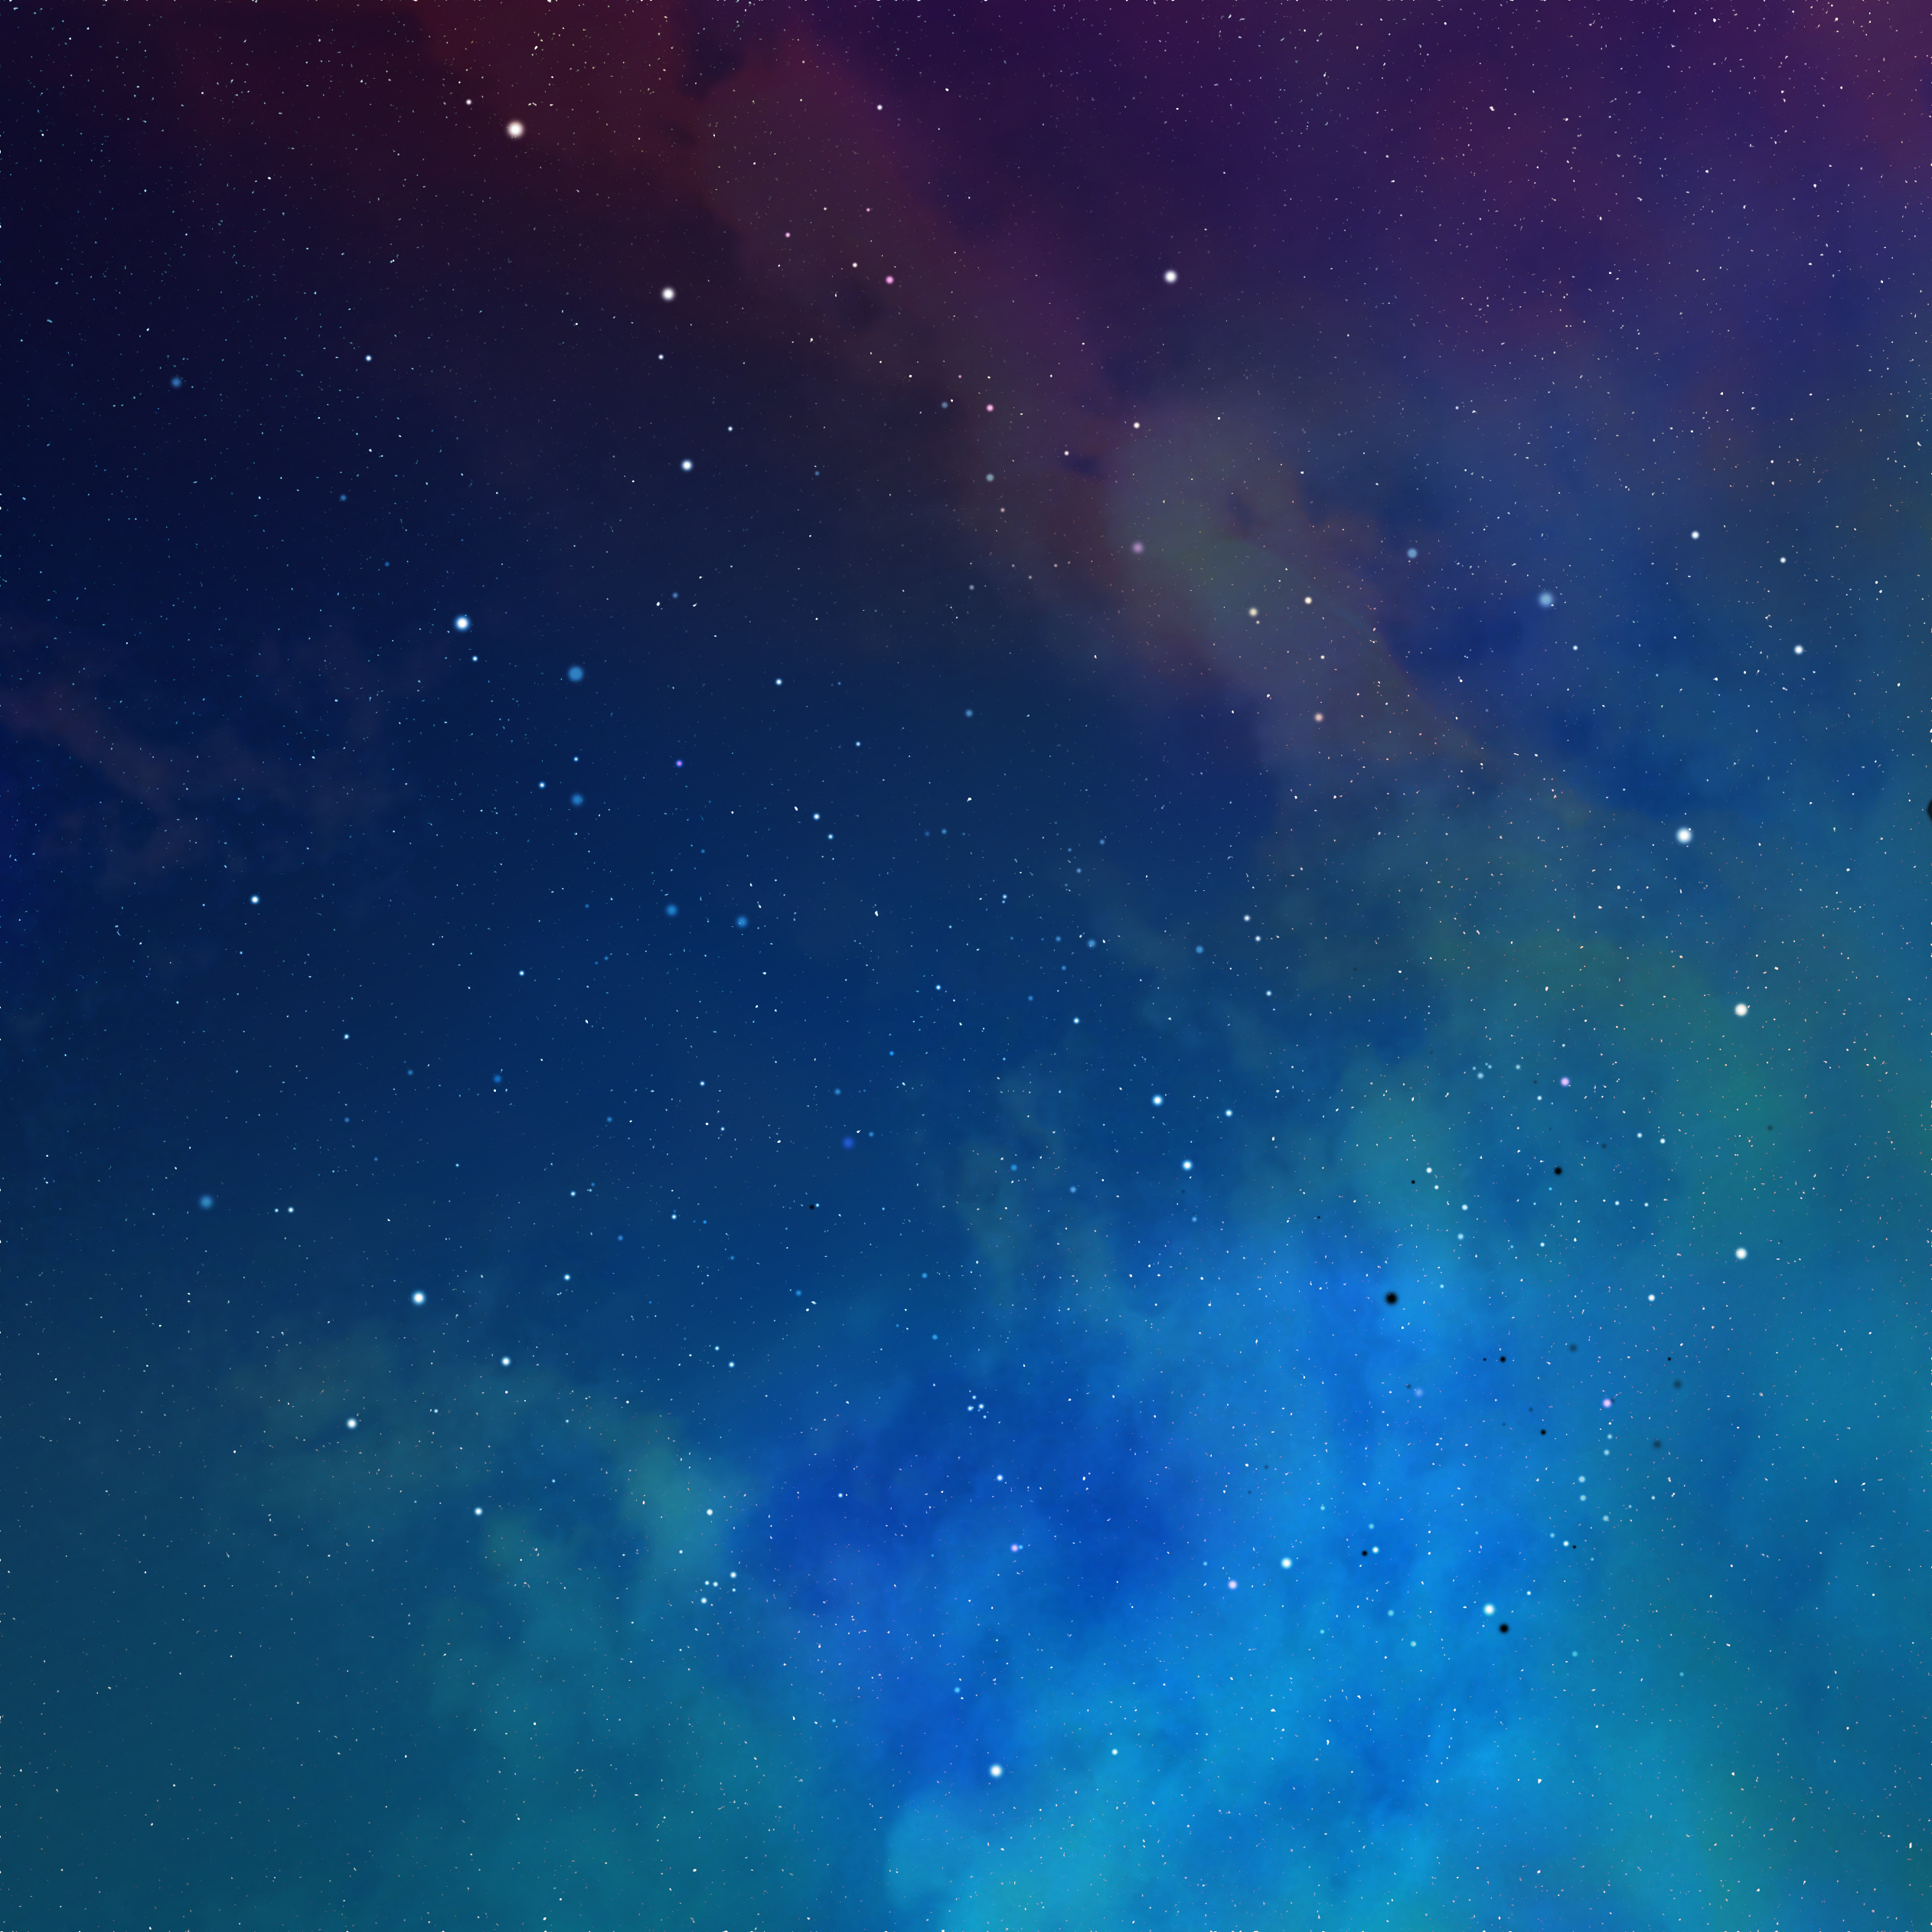 Wallpapers For Ipad Air 2 Wallpapers